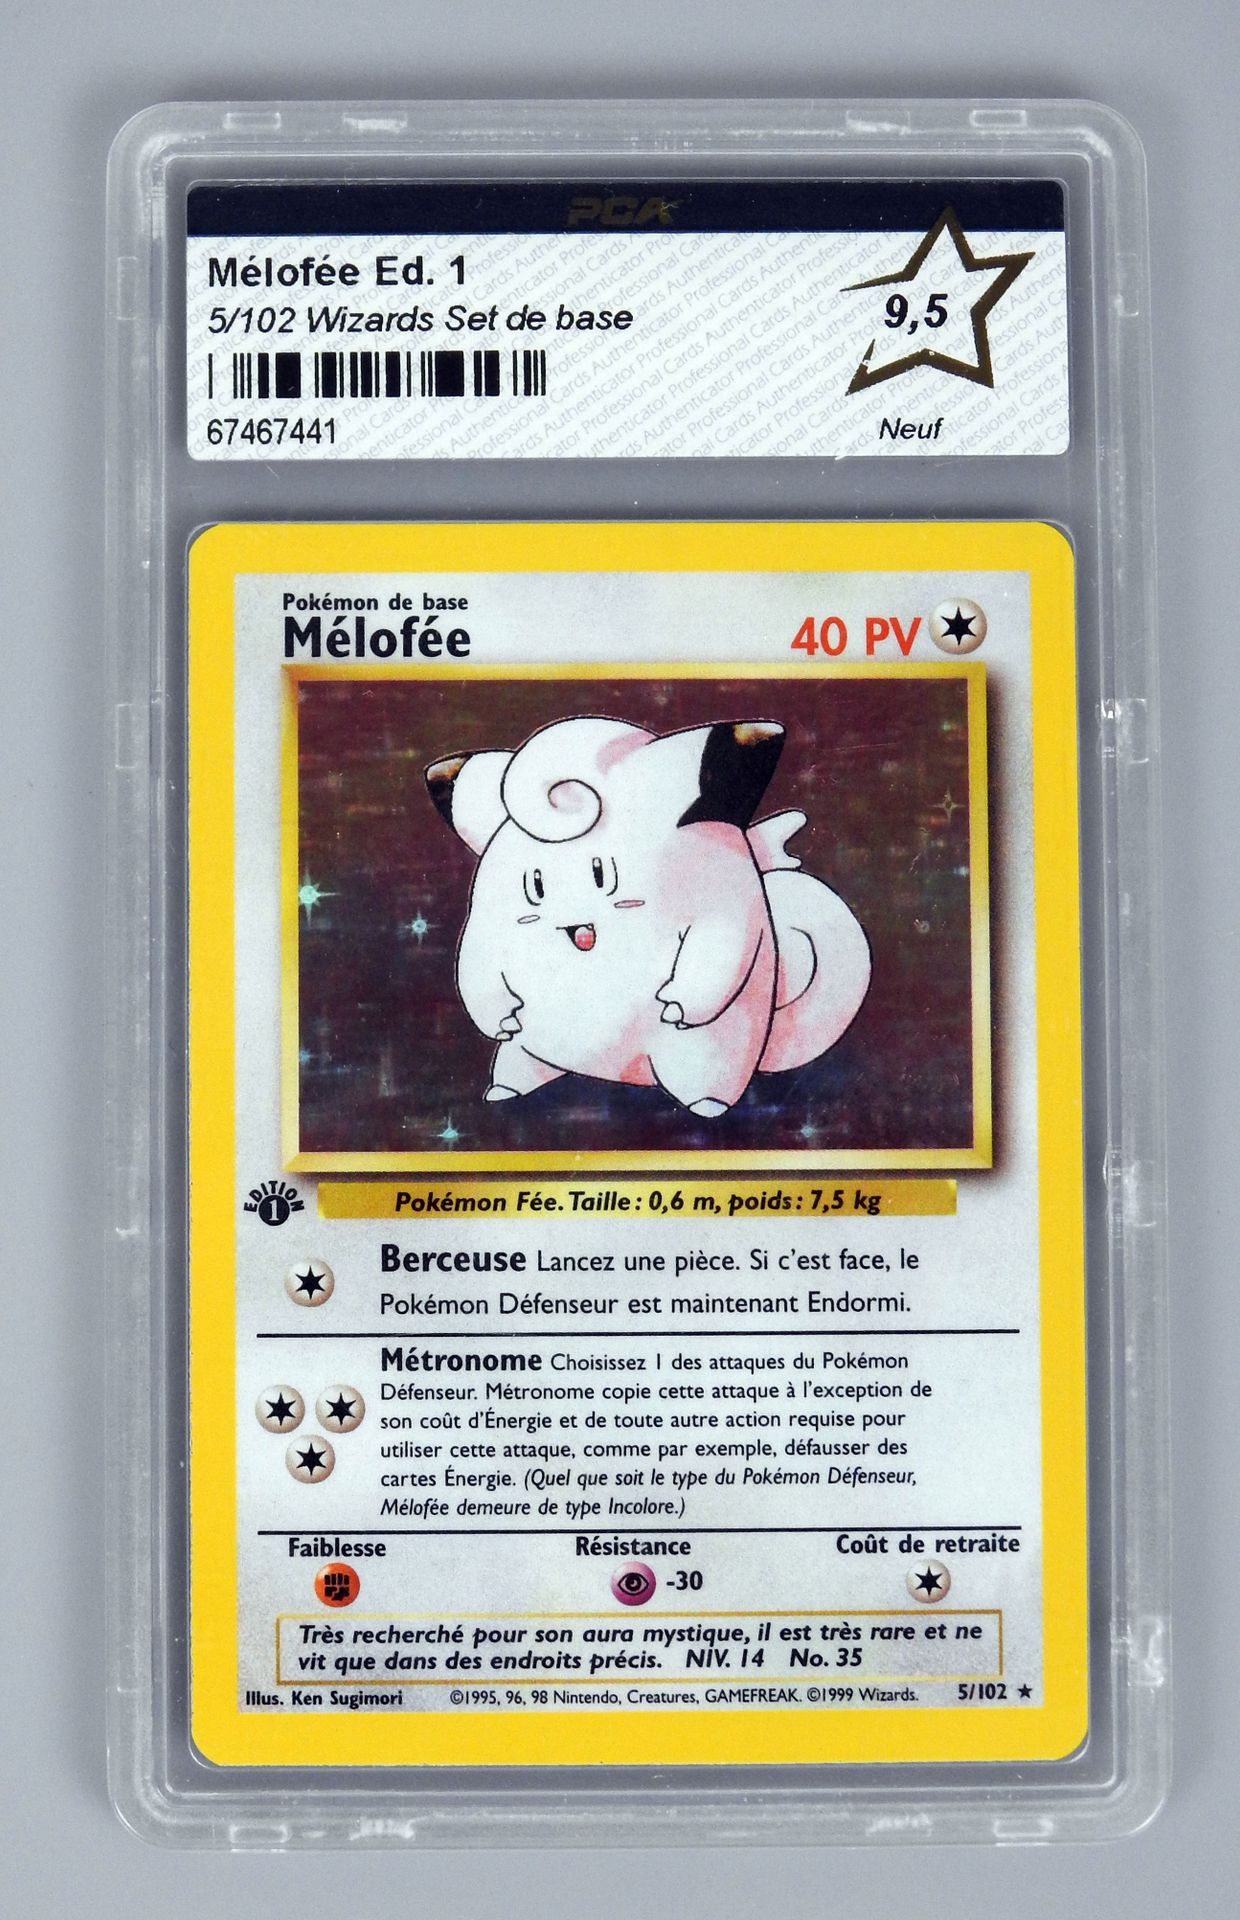 Null MELOFEE Ed 1

Wizards Block Basic Set 5/102

Pokémon card rated PCA 9.5/10